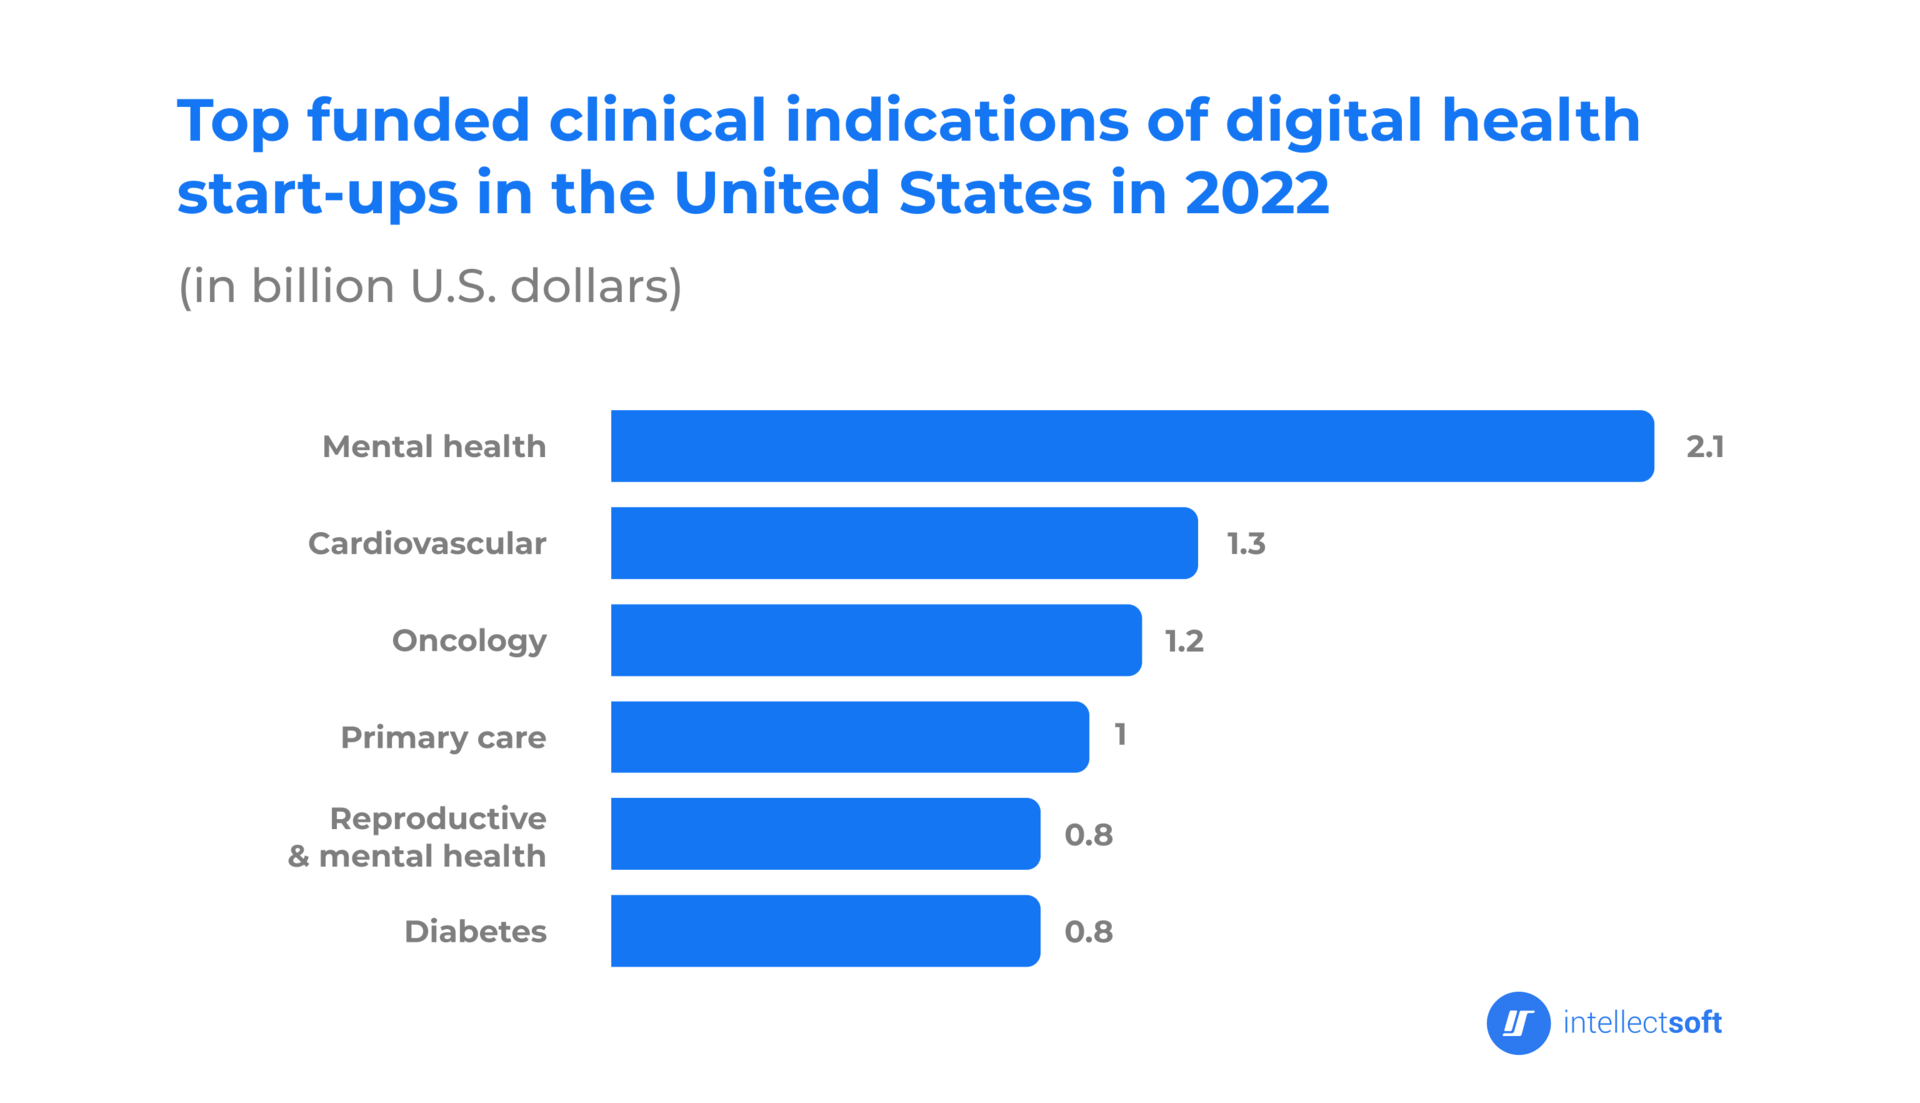 Top funded clinical indications chart of digital health startups in the US, 2022